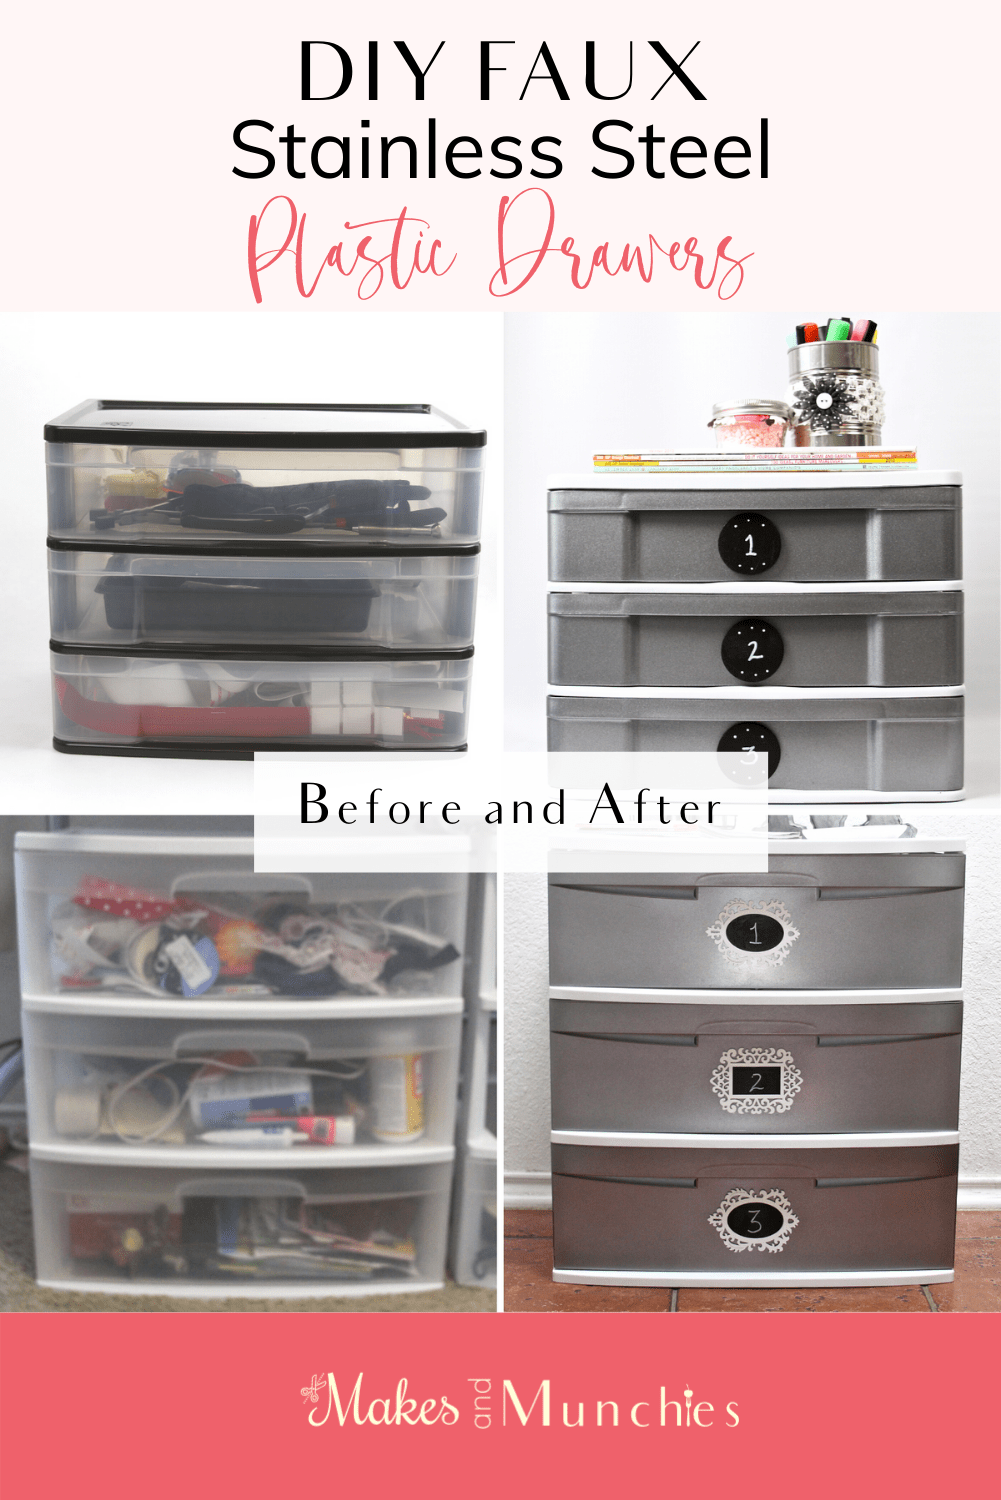 DIY Faux Stainless Steel Plastic Drawers